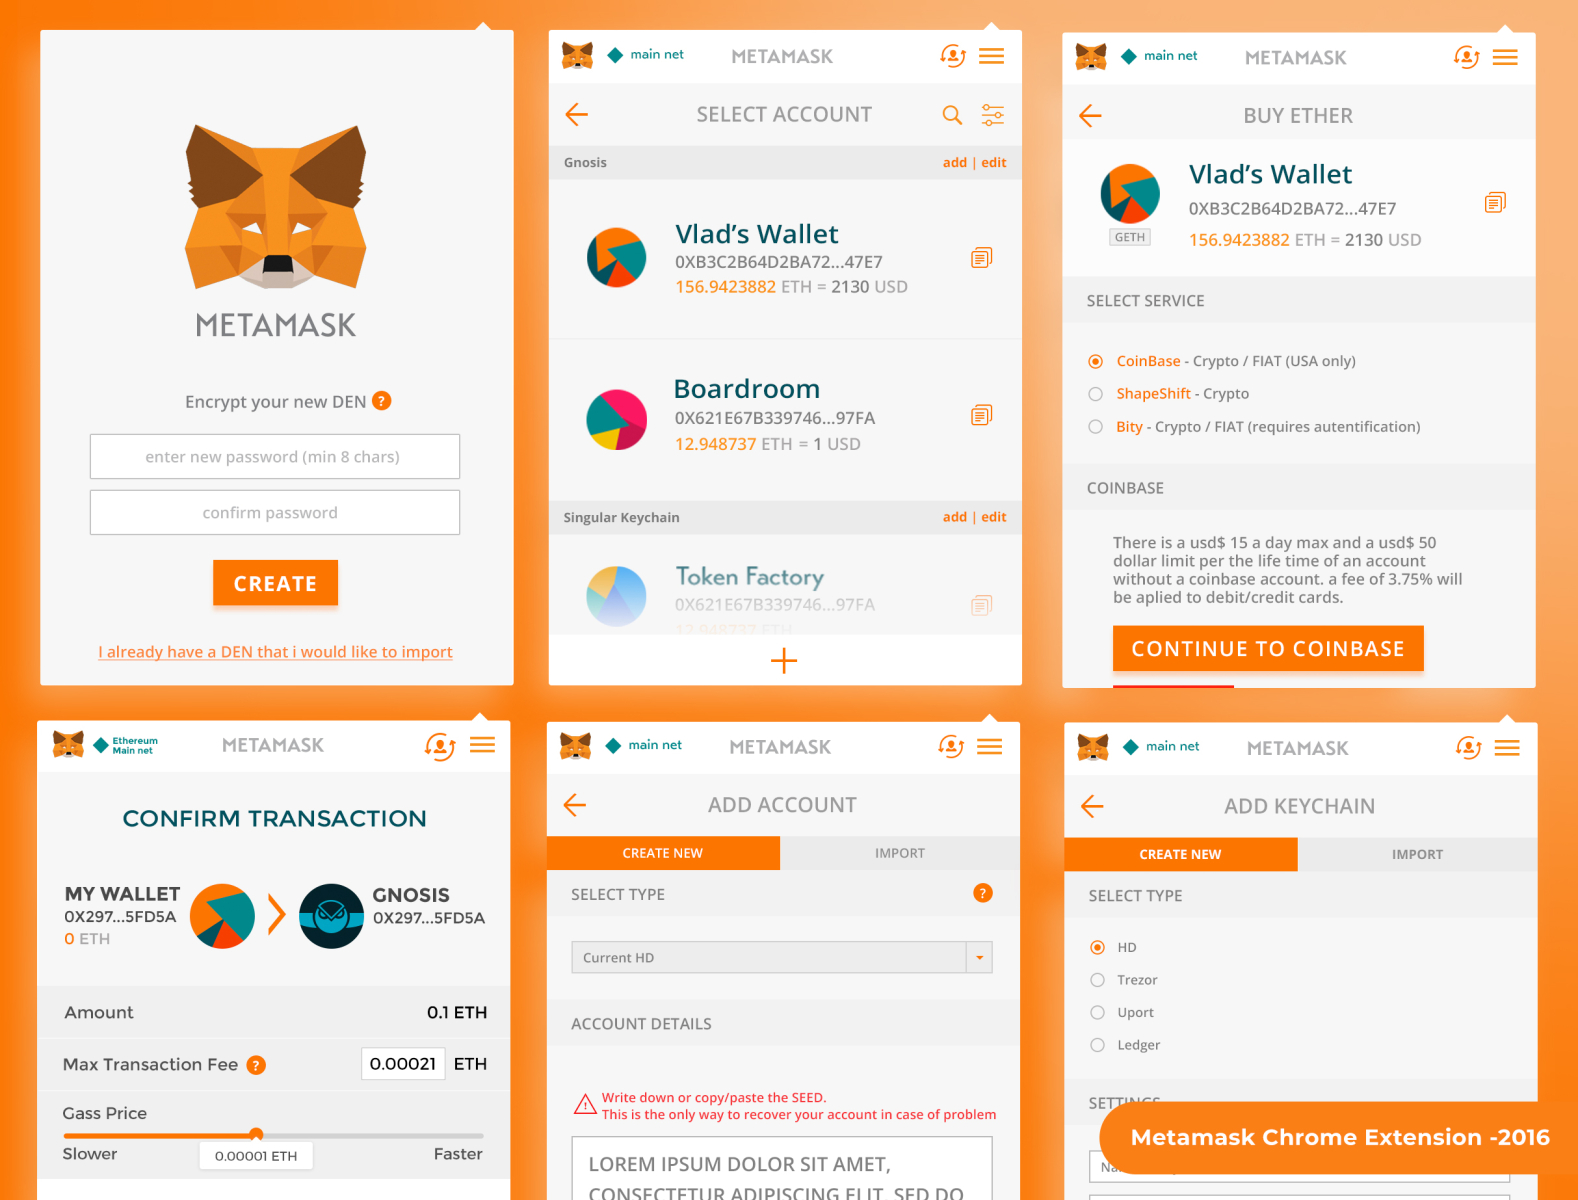 Install MetaMask Extension for Chrome